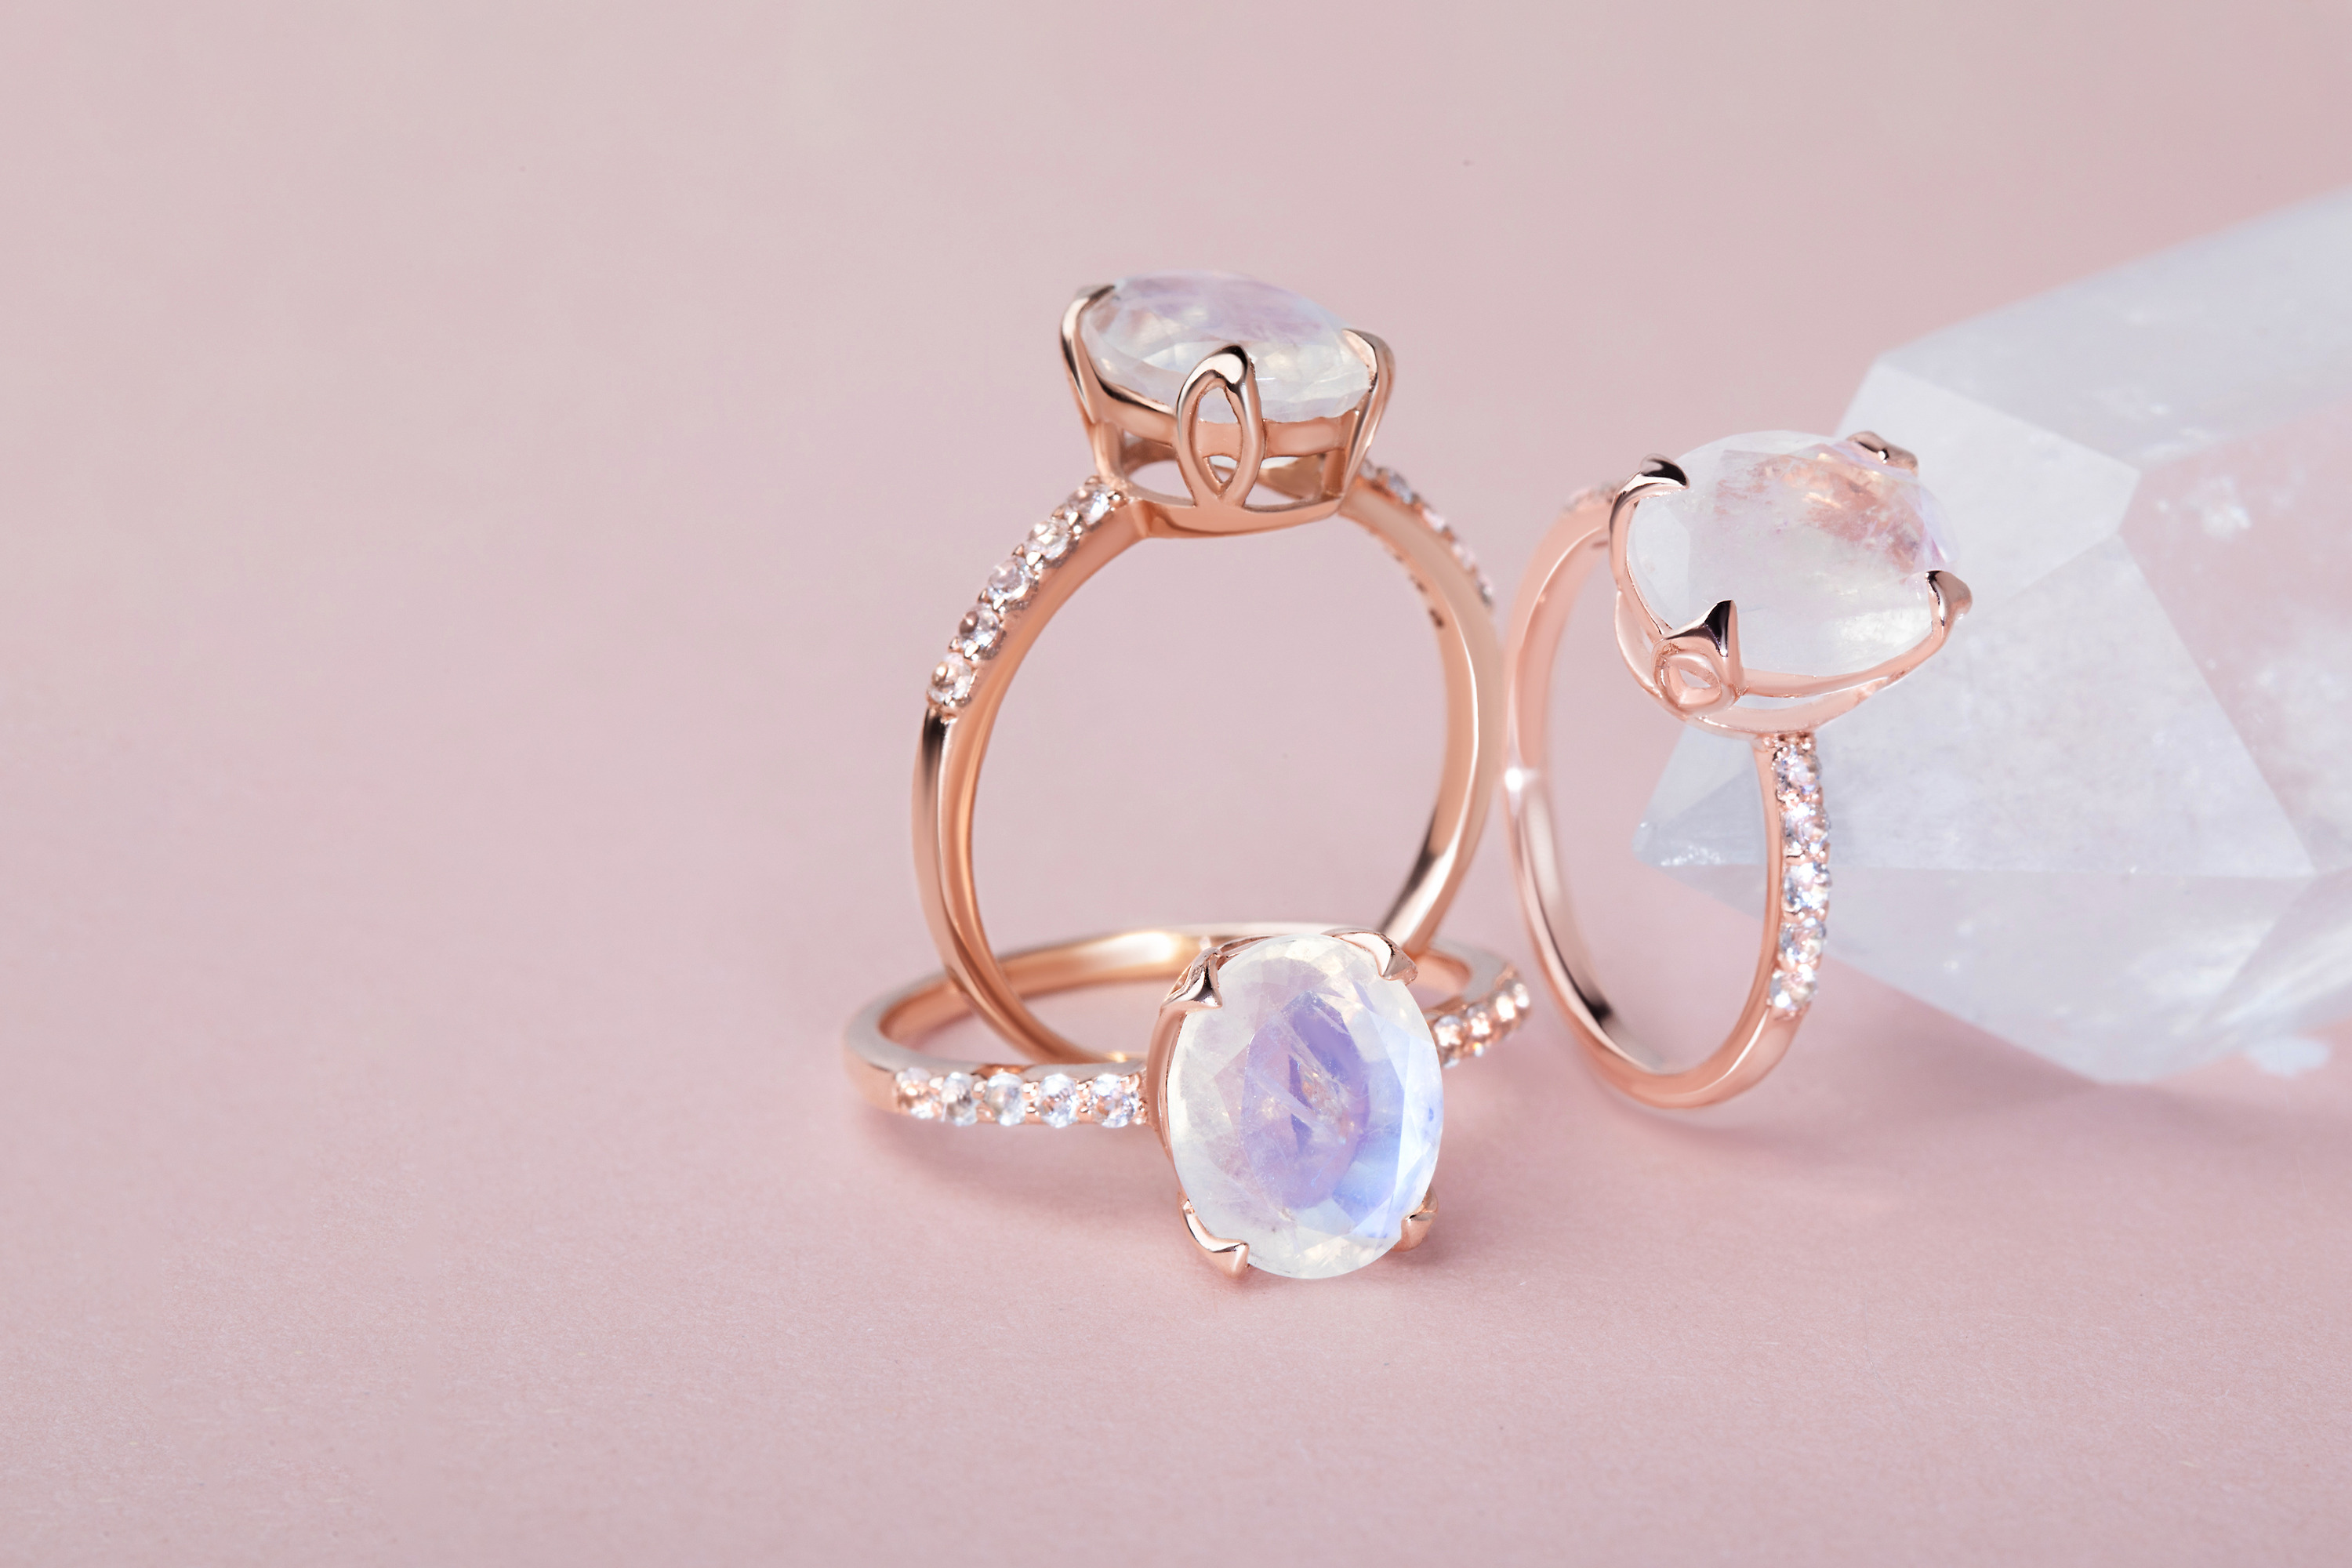 The Moonstone Ring Harlow in 14kt Rose Gold Vermeil is shown in different angles.